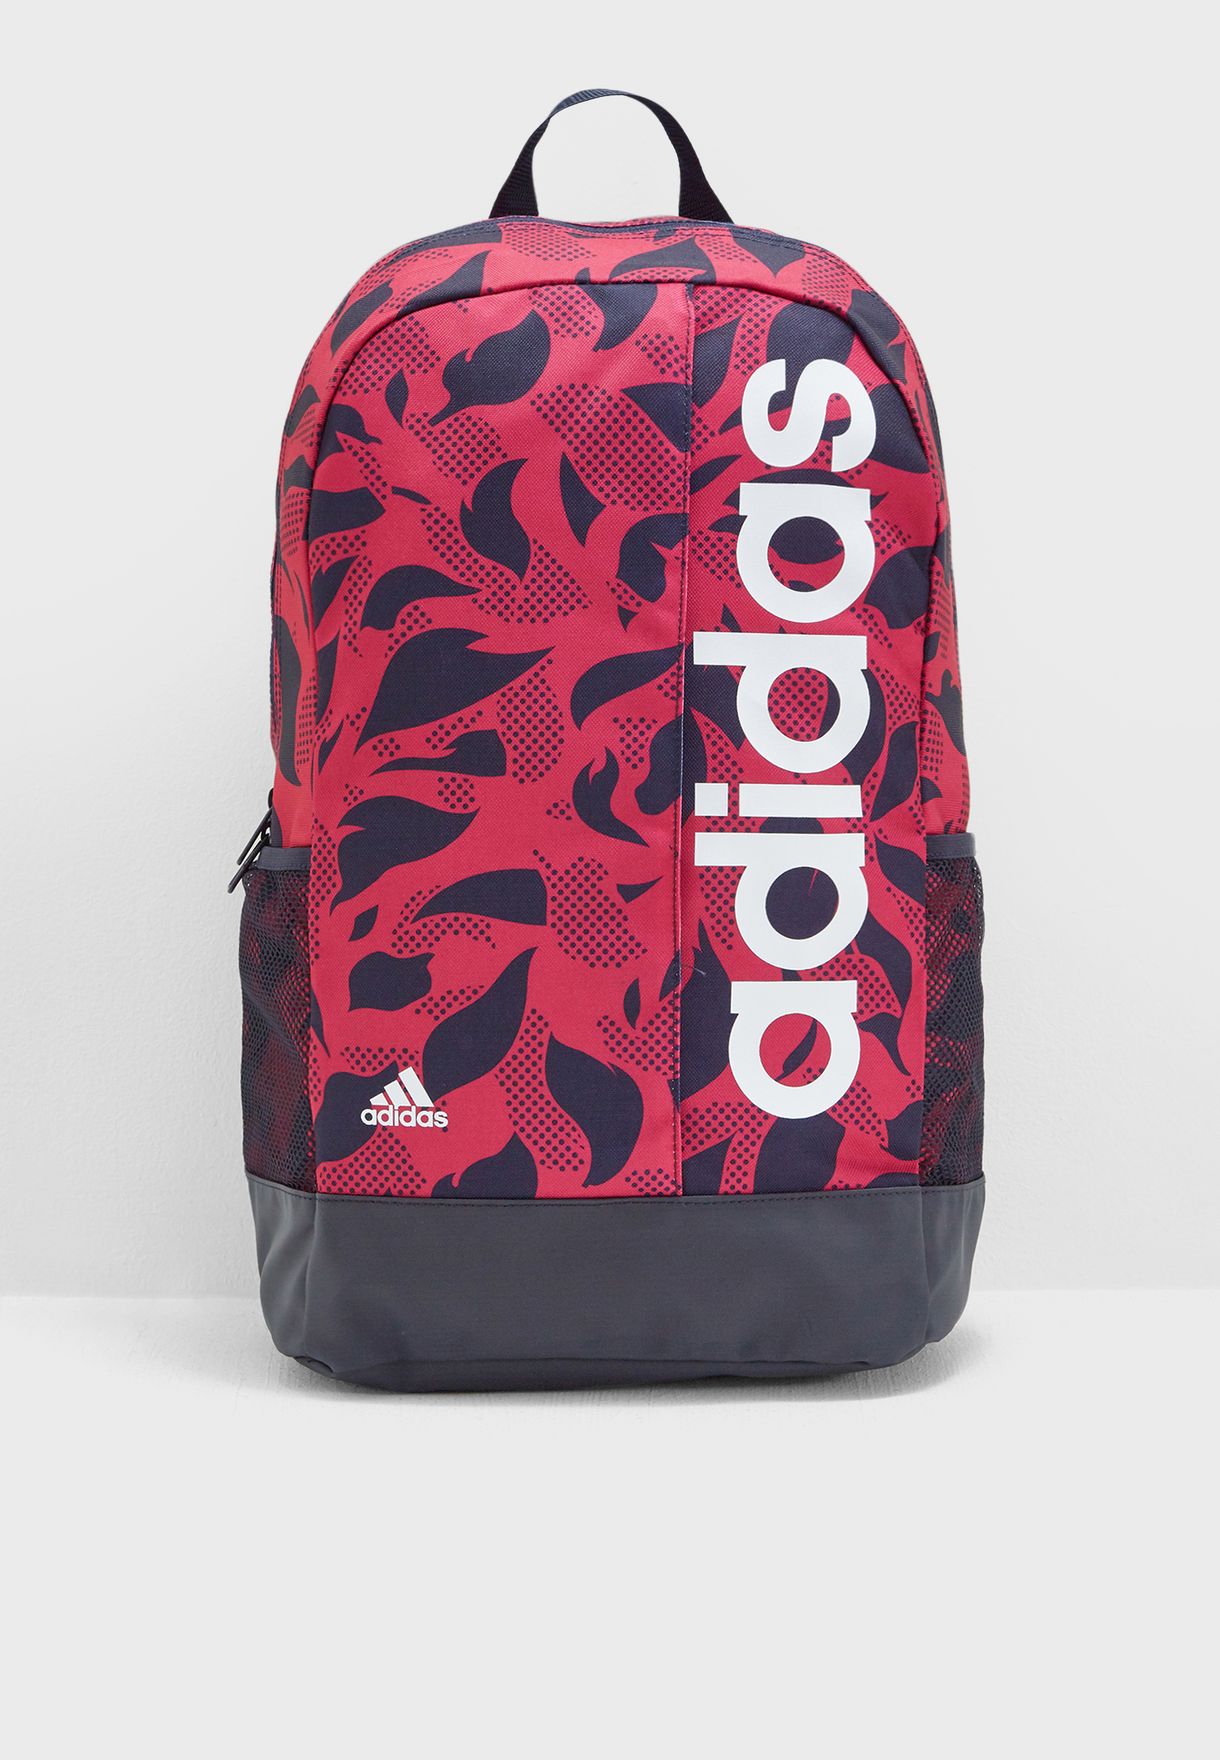 Buy adidas prints Linear Graphic Backpack for in Worldwide